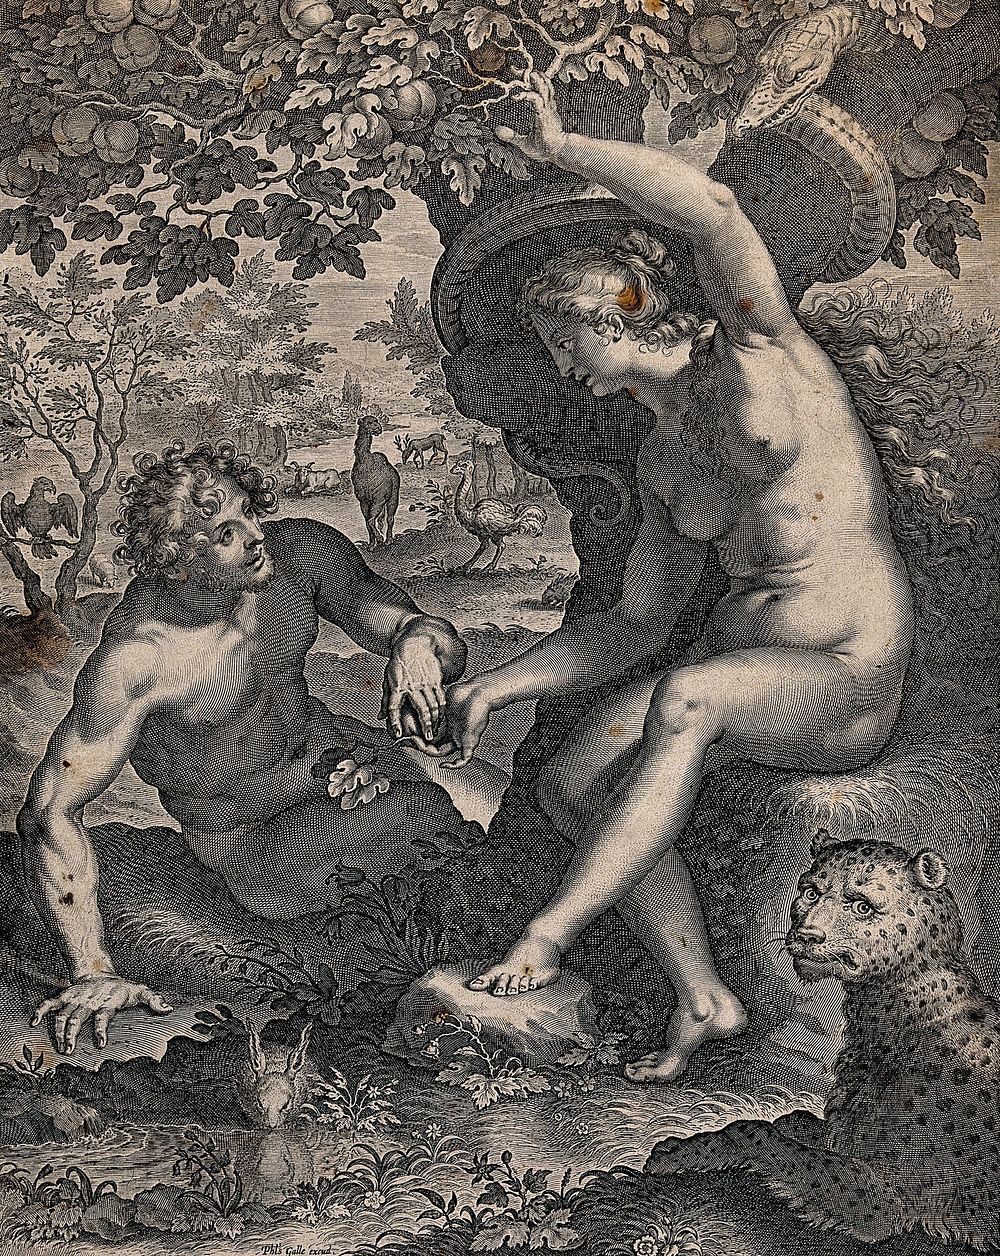 In the Garden of Eden, Eve offers Adam the apple. Line engraving by C. Galle after G.B. Paggi.